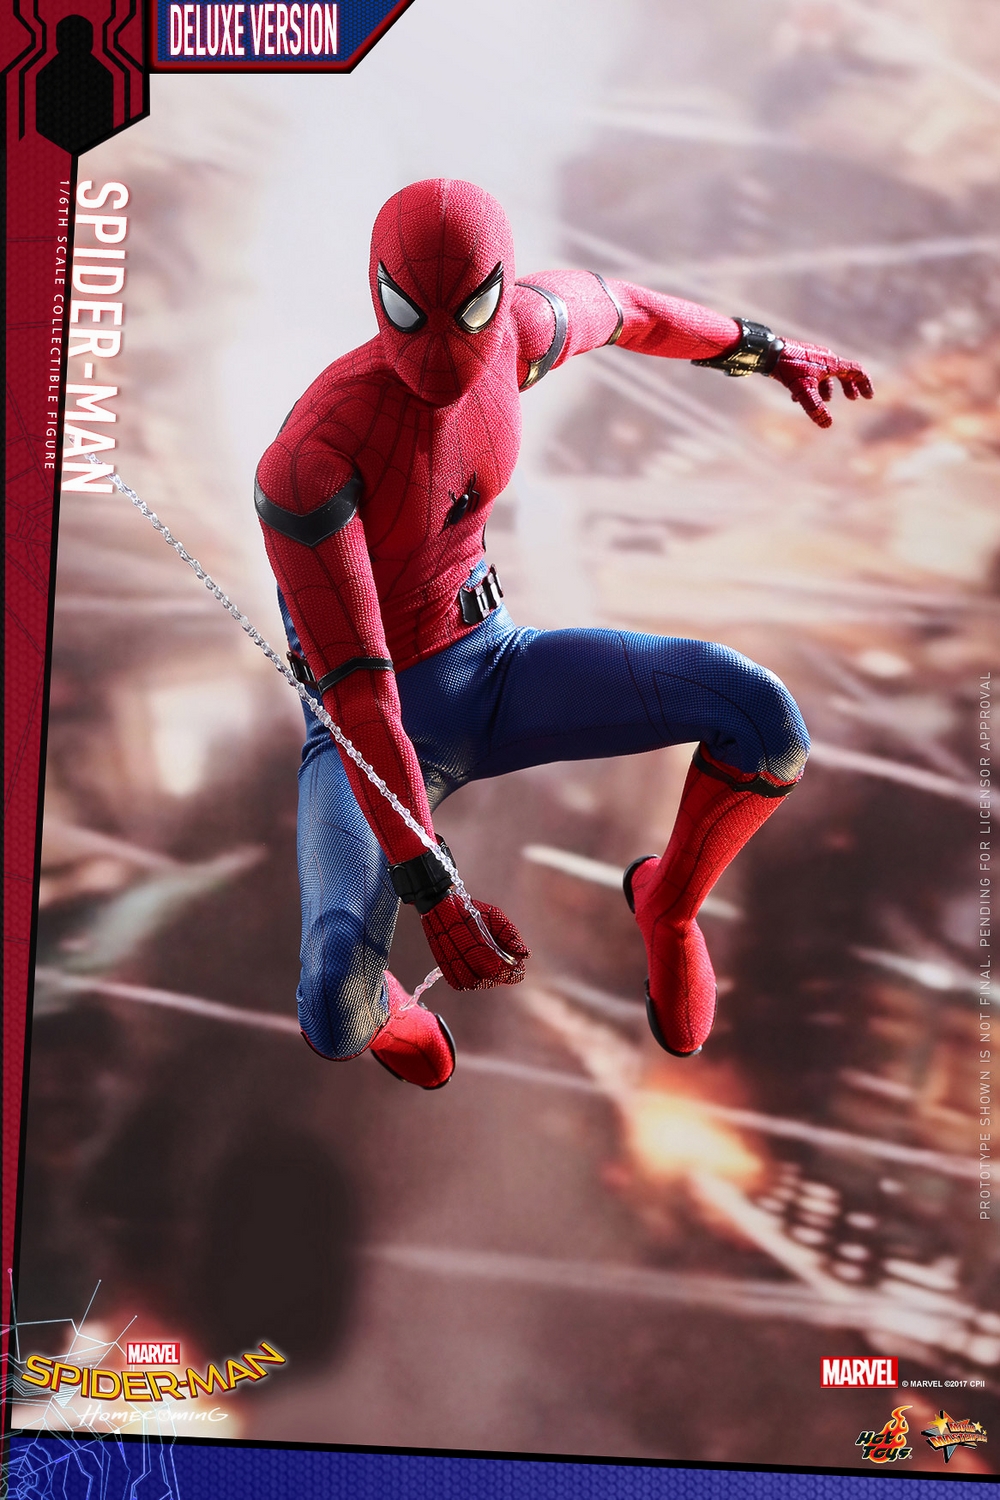 Hot-Toys-MMS426-Spider-Man-Homecoming-Deluxe-012.jpg